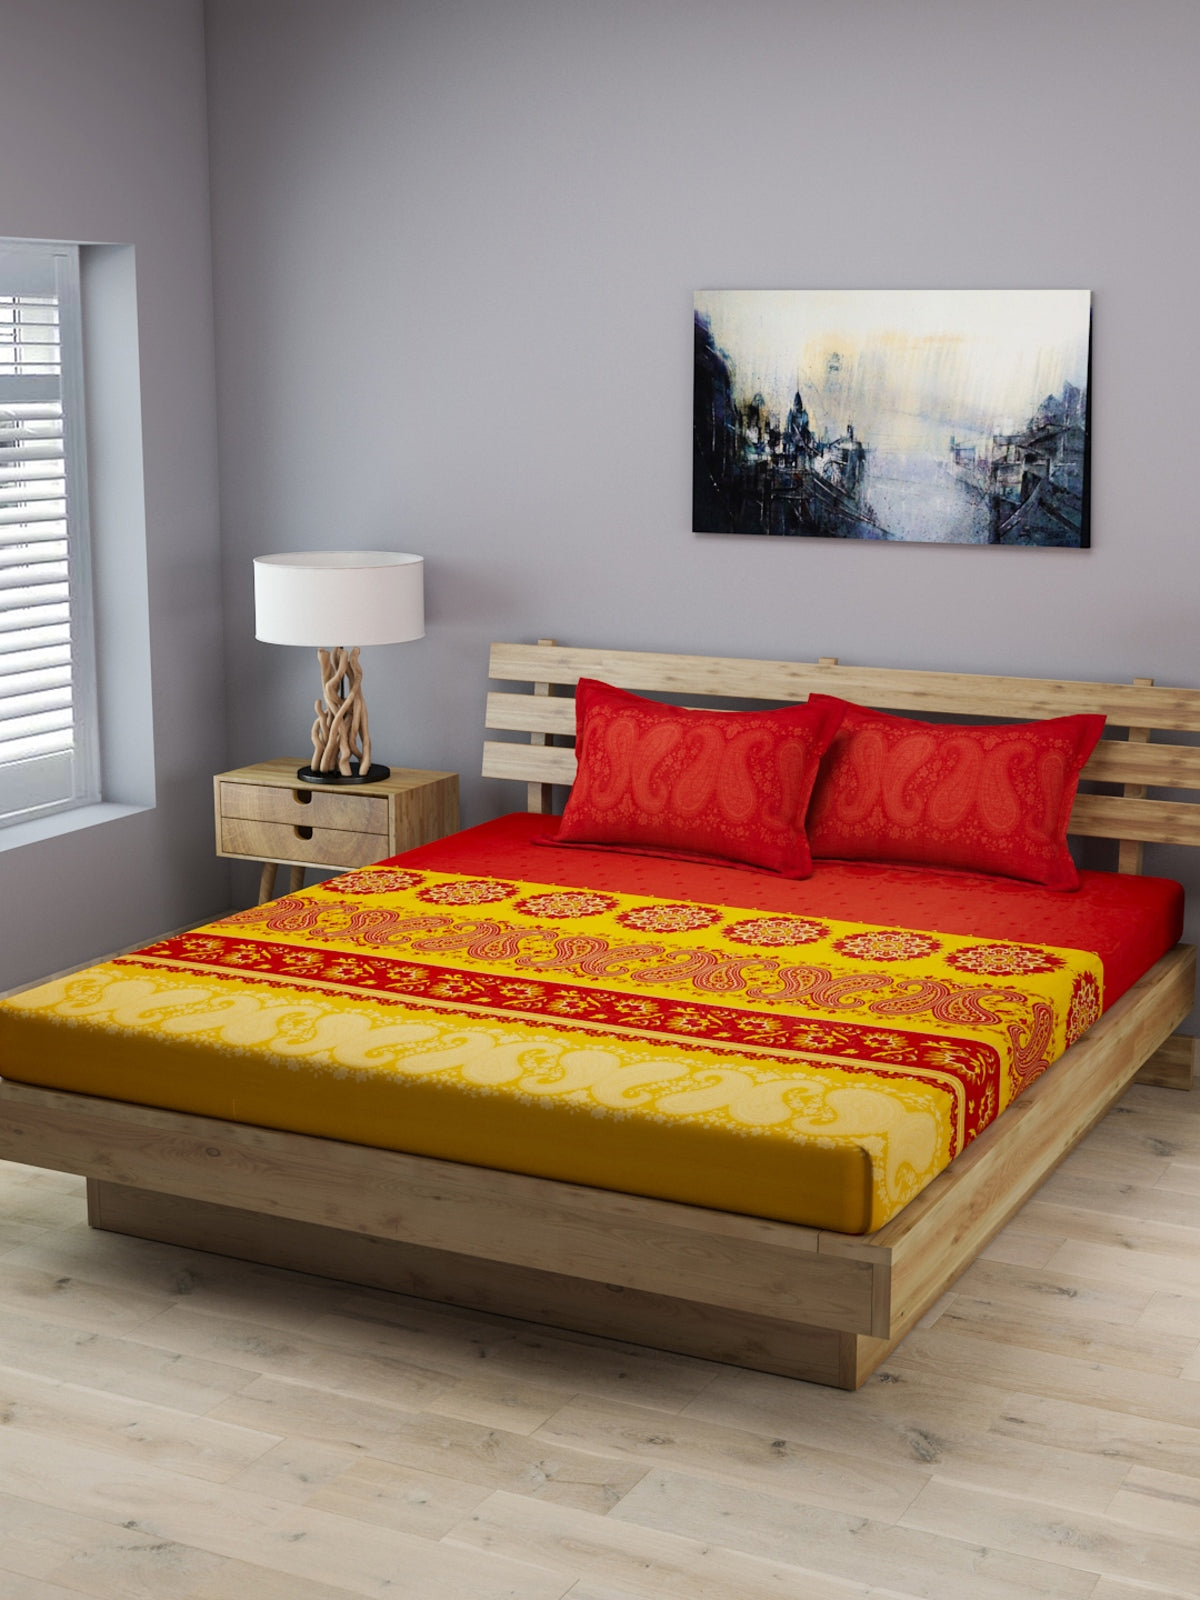 Red & Yellow 210 TC Bedsheet with 2 Pillow Covers